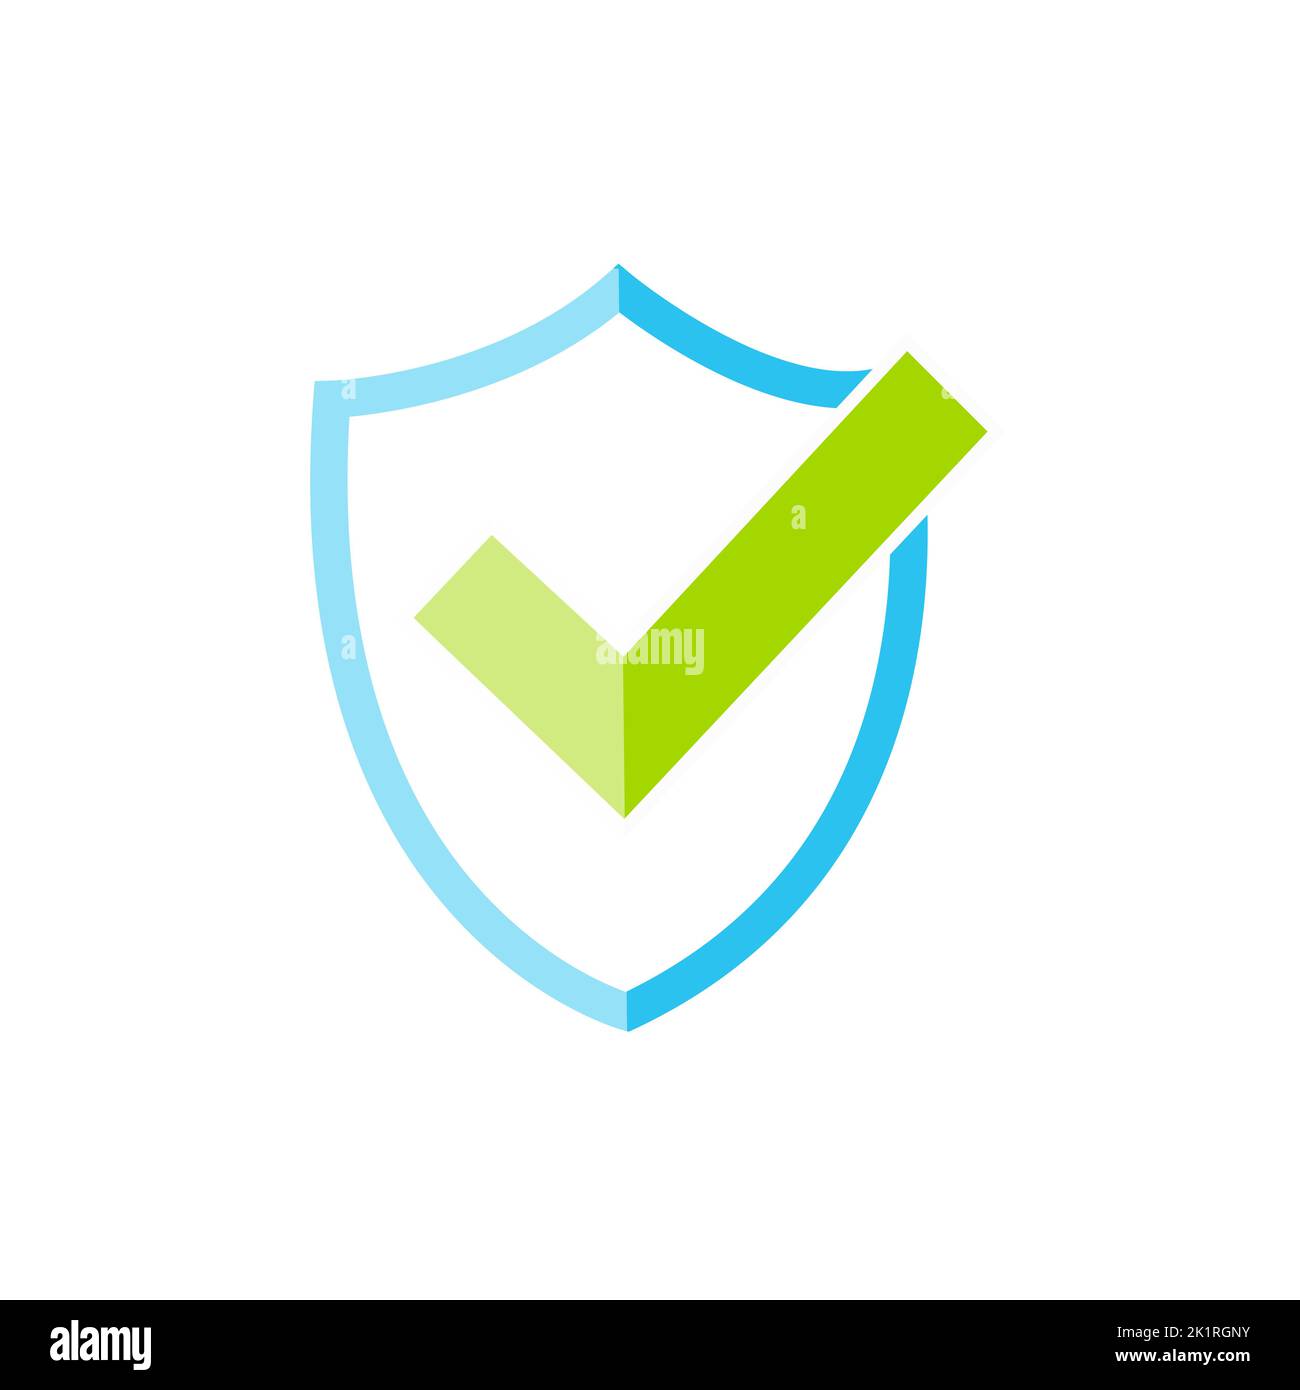 Check mark line icon. Accepted or Approve sign. Tick shield symbol. Quality design flat app element. Editable stroke Confirmed icon. Vector Stock Vector